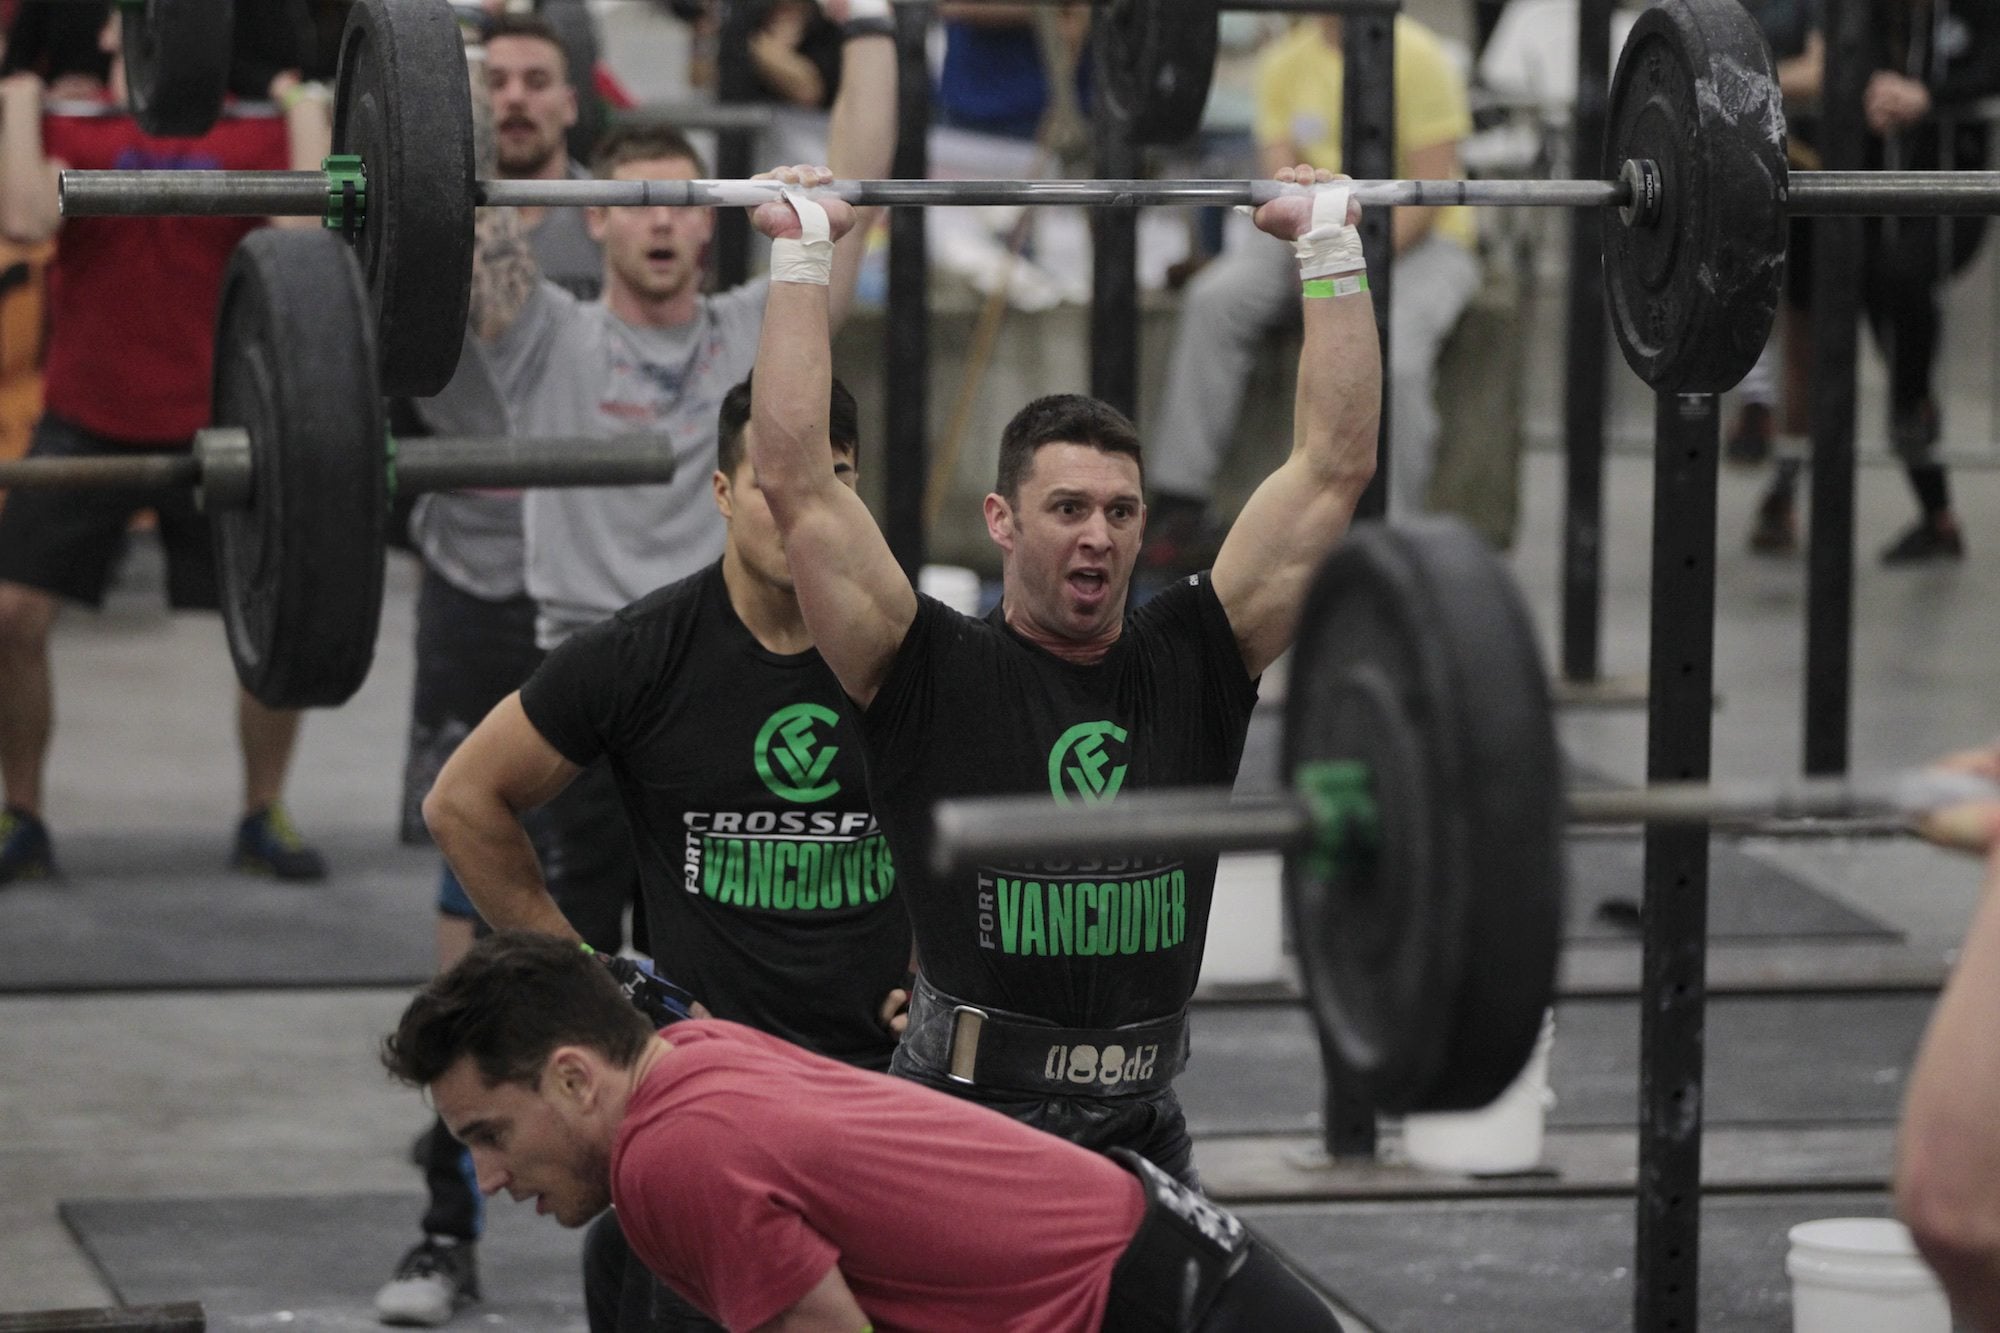 Adam Neiffer competes at the CrossFit Fort Vancouver Championship.